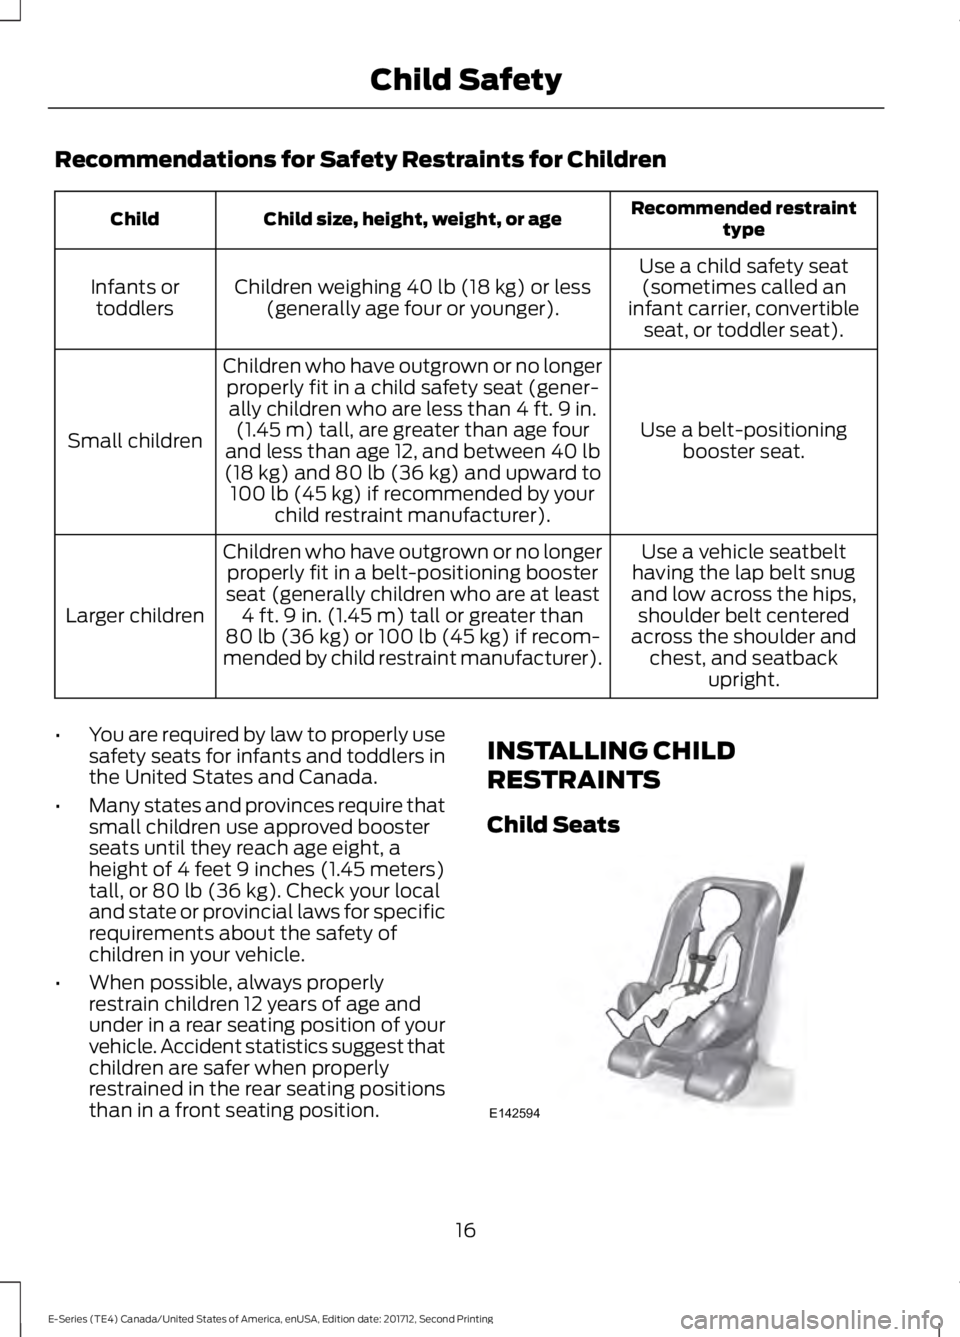 FORD E-350 2018 User Guide Recommendations for Safety Restraints for Children
Recommended restraint
type
Child size, height, weight, or age
Child
Use a child safety seat(sometimes called an
infant carrier, convertible seat, or 